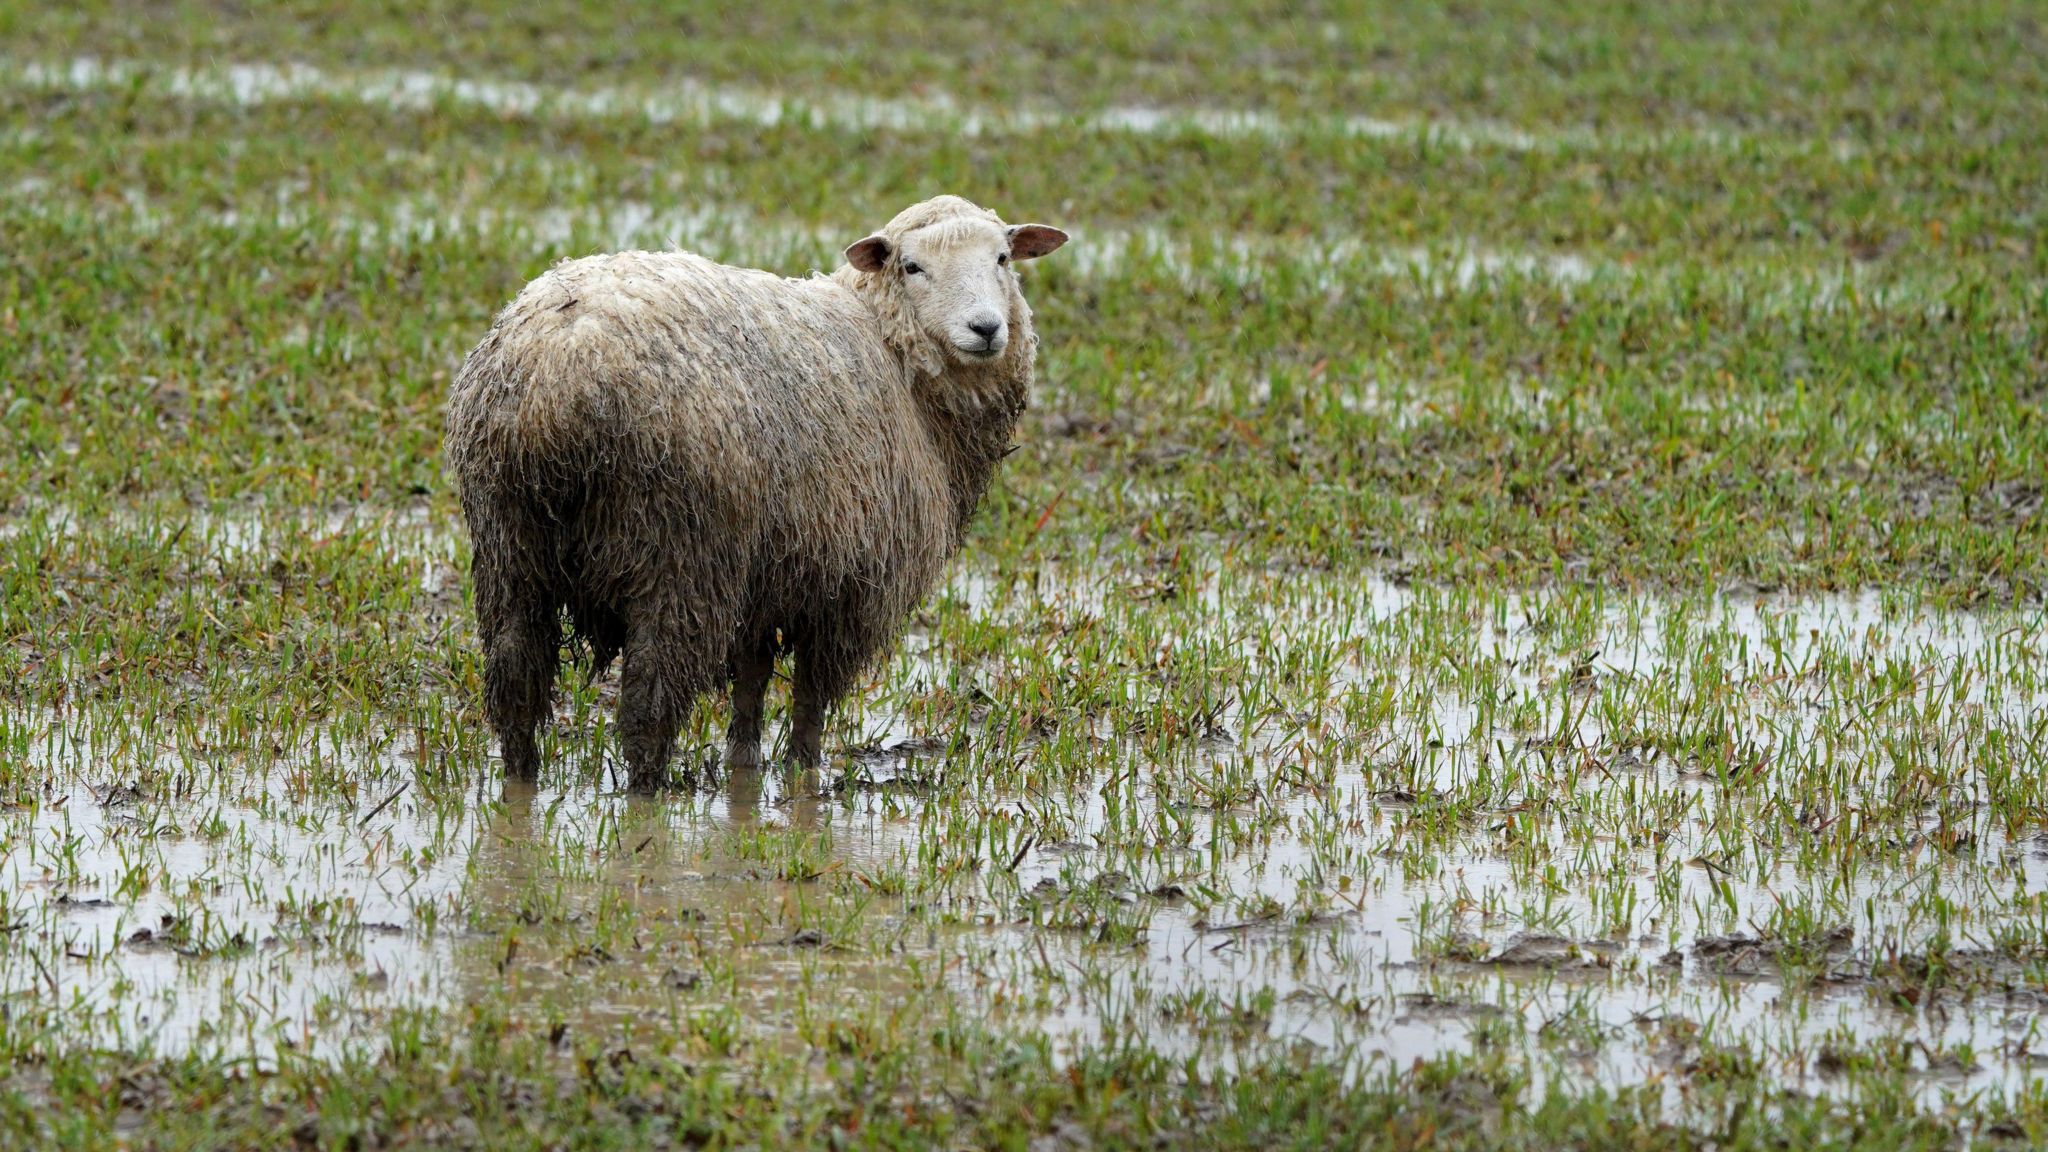 A wet and muddy sheep stands in a flooded field